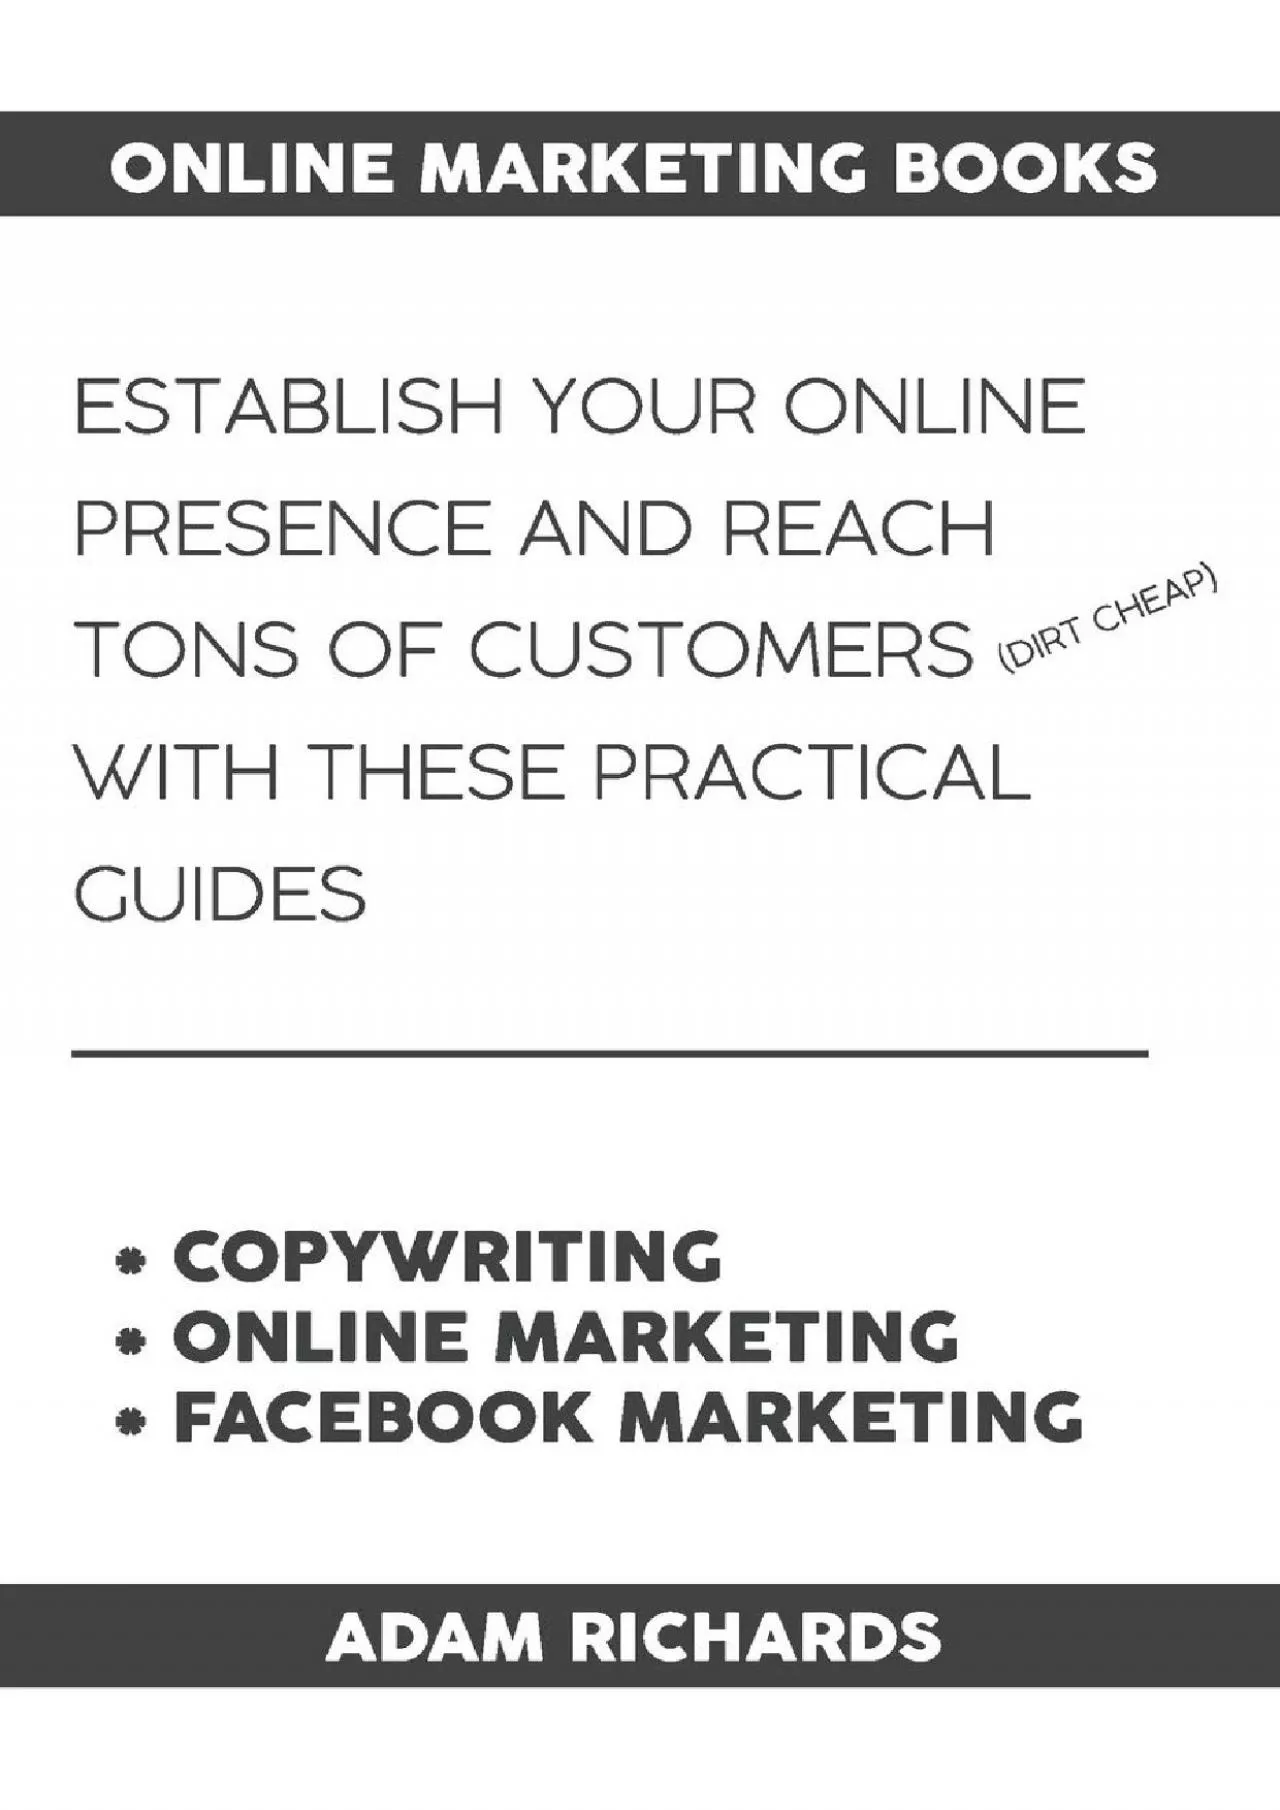 Online Marketing Books: Establish Your Online Presence And Reach Tons of Customers (Dirt